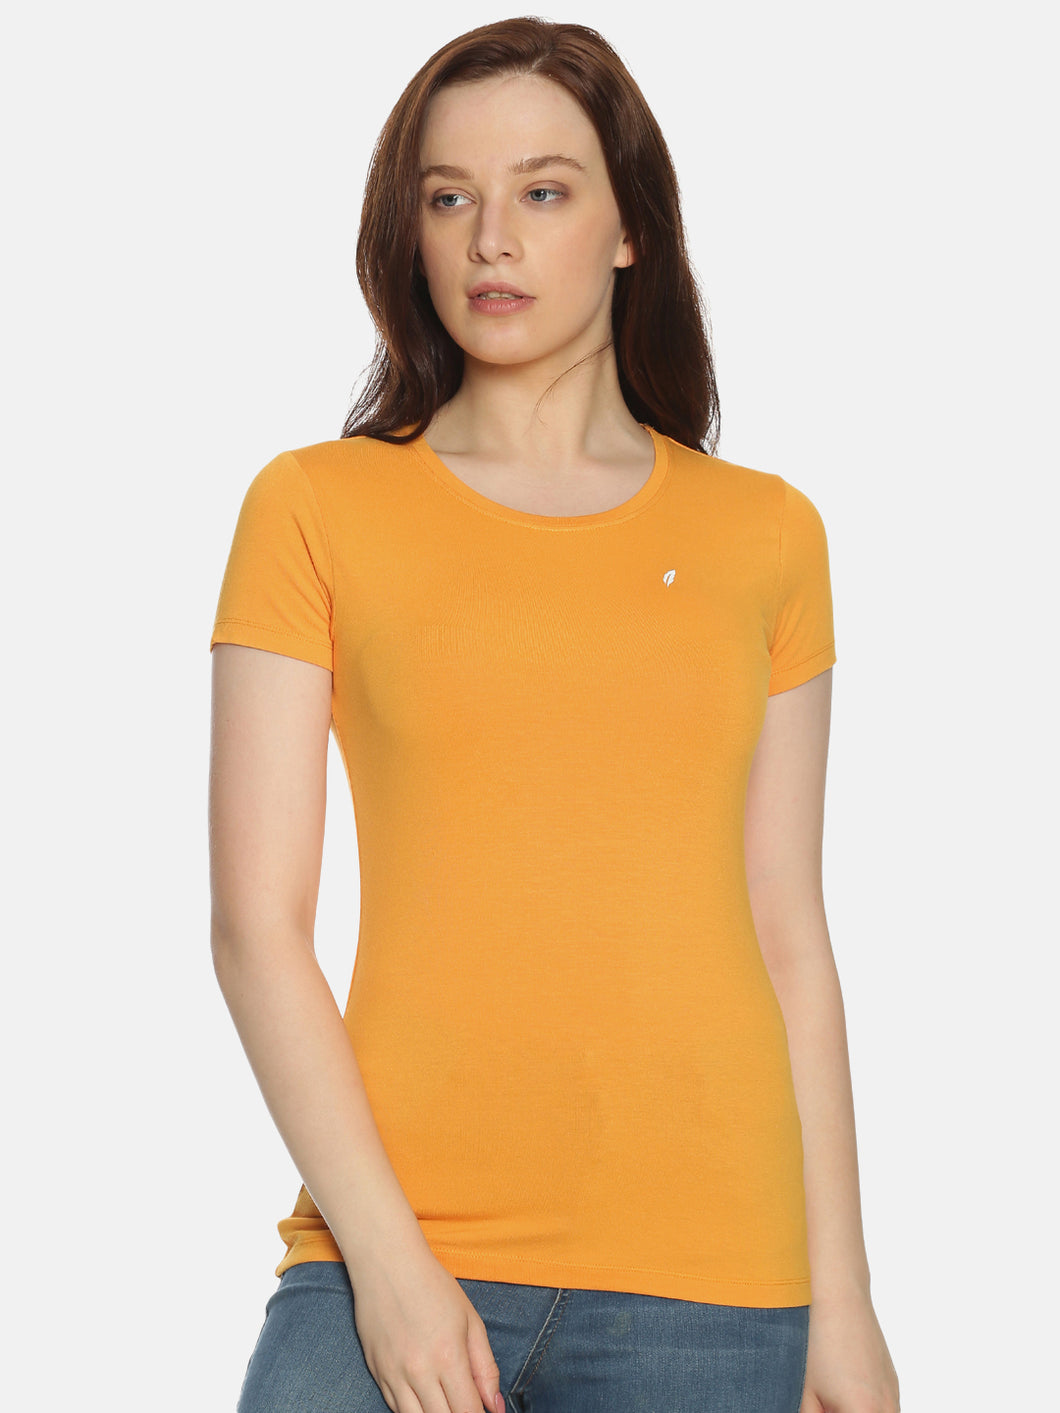 Women's Solid Stretch Tee  (Short Sleeve)